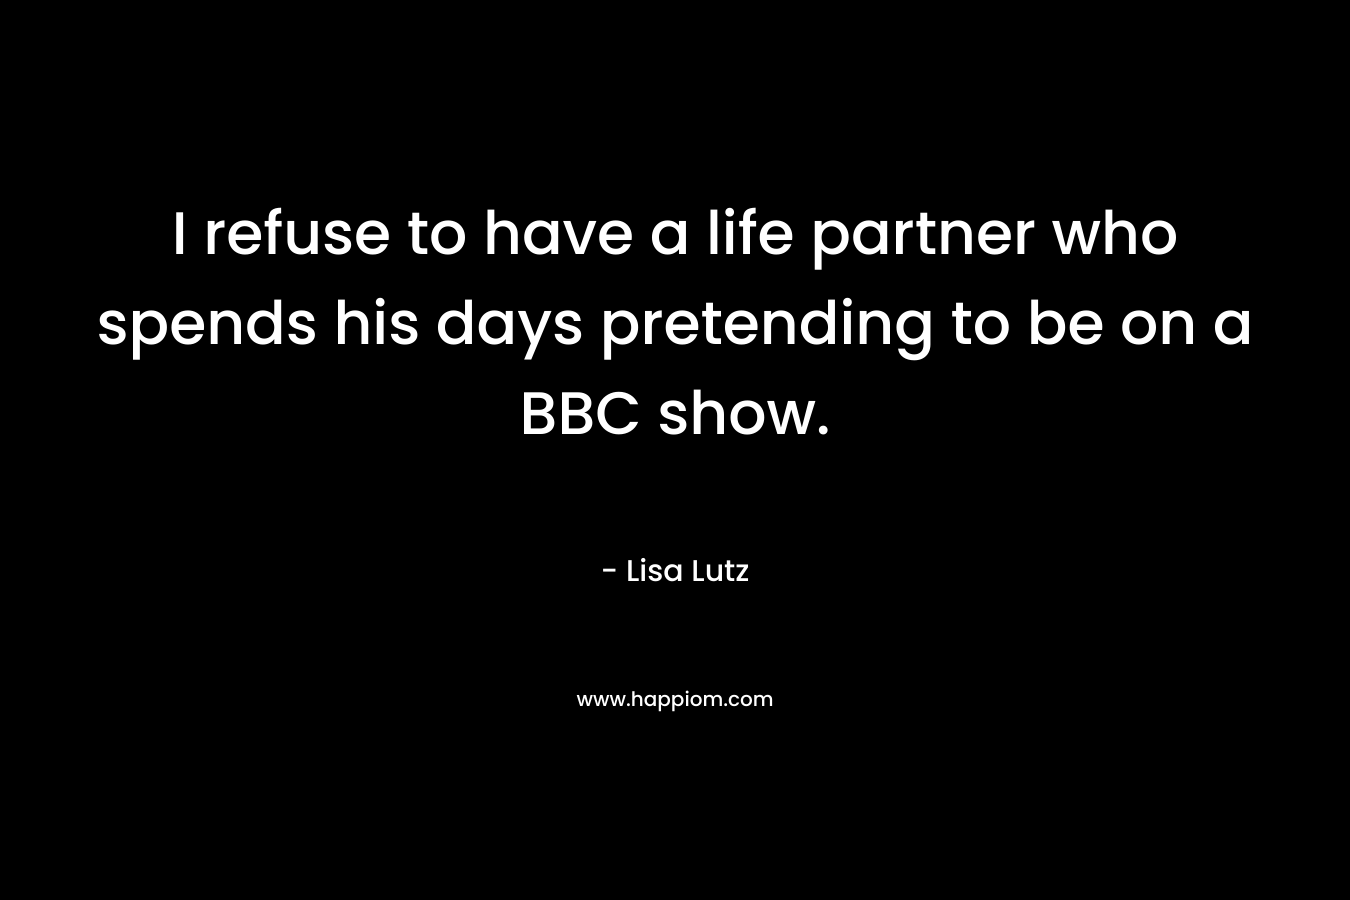 I refuse to have a life partner who spends his days pretending to be on a BBC show. – Lisa Lutz